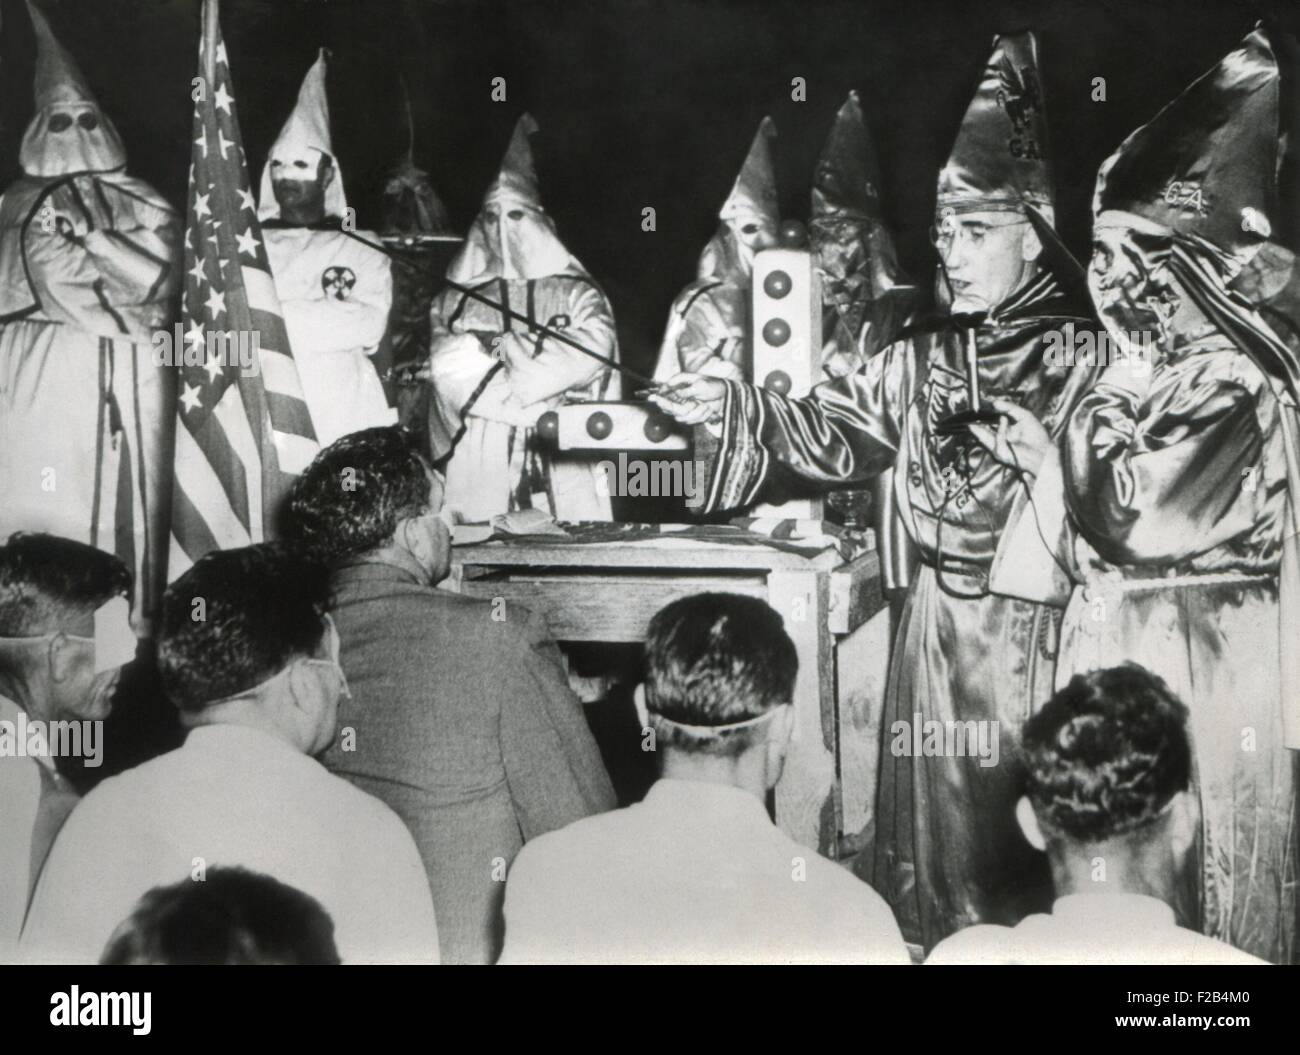 Ku Klux Klan initiation at Stone Mountain near Atlanta, Georgia. June 15, 1949. Dr. Samuel Green, Grand Dragon of the KKK, unmasked and holding a sword, accepts kneeling candidates into the racist hate group. - (BSLOC 2015 1 207) Stock Photo